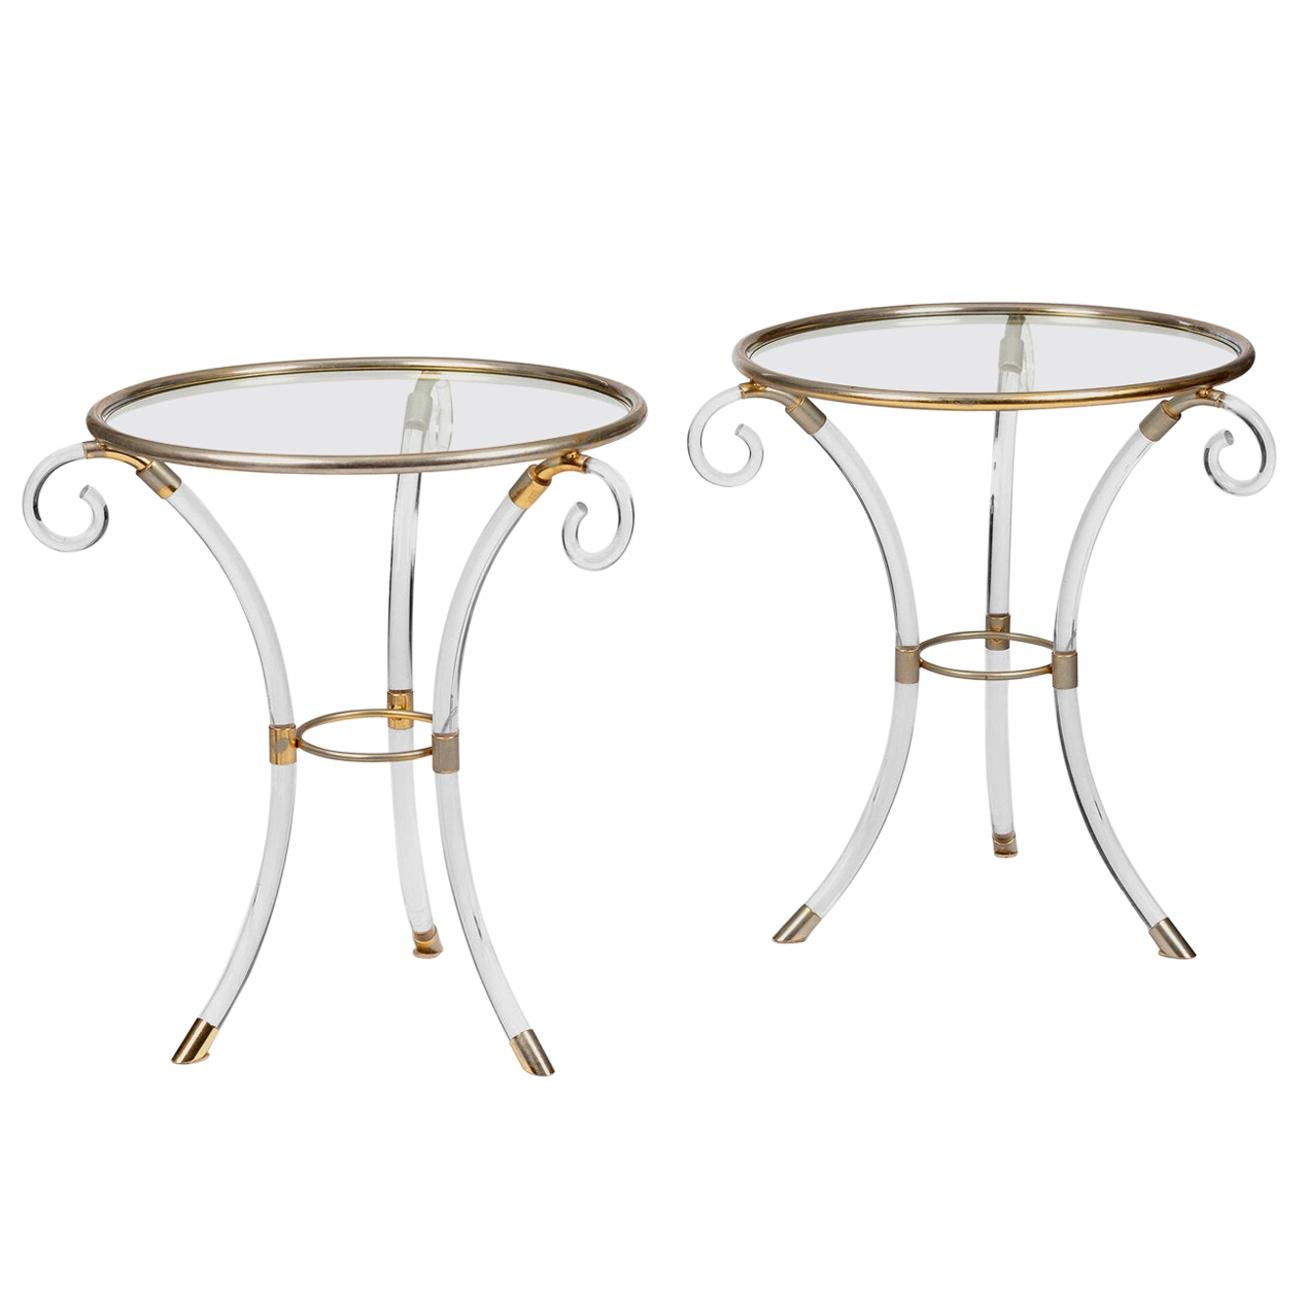 Pair of Perspex Tables After Maison Jansen